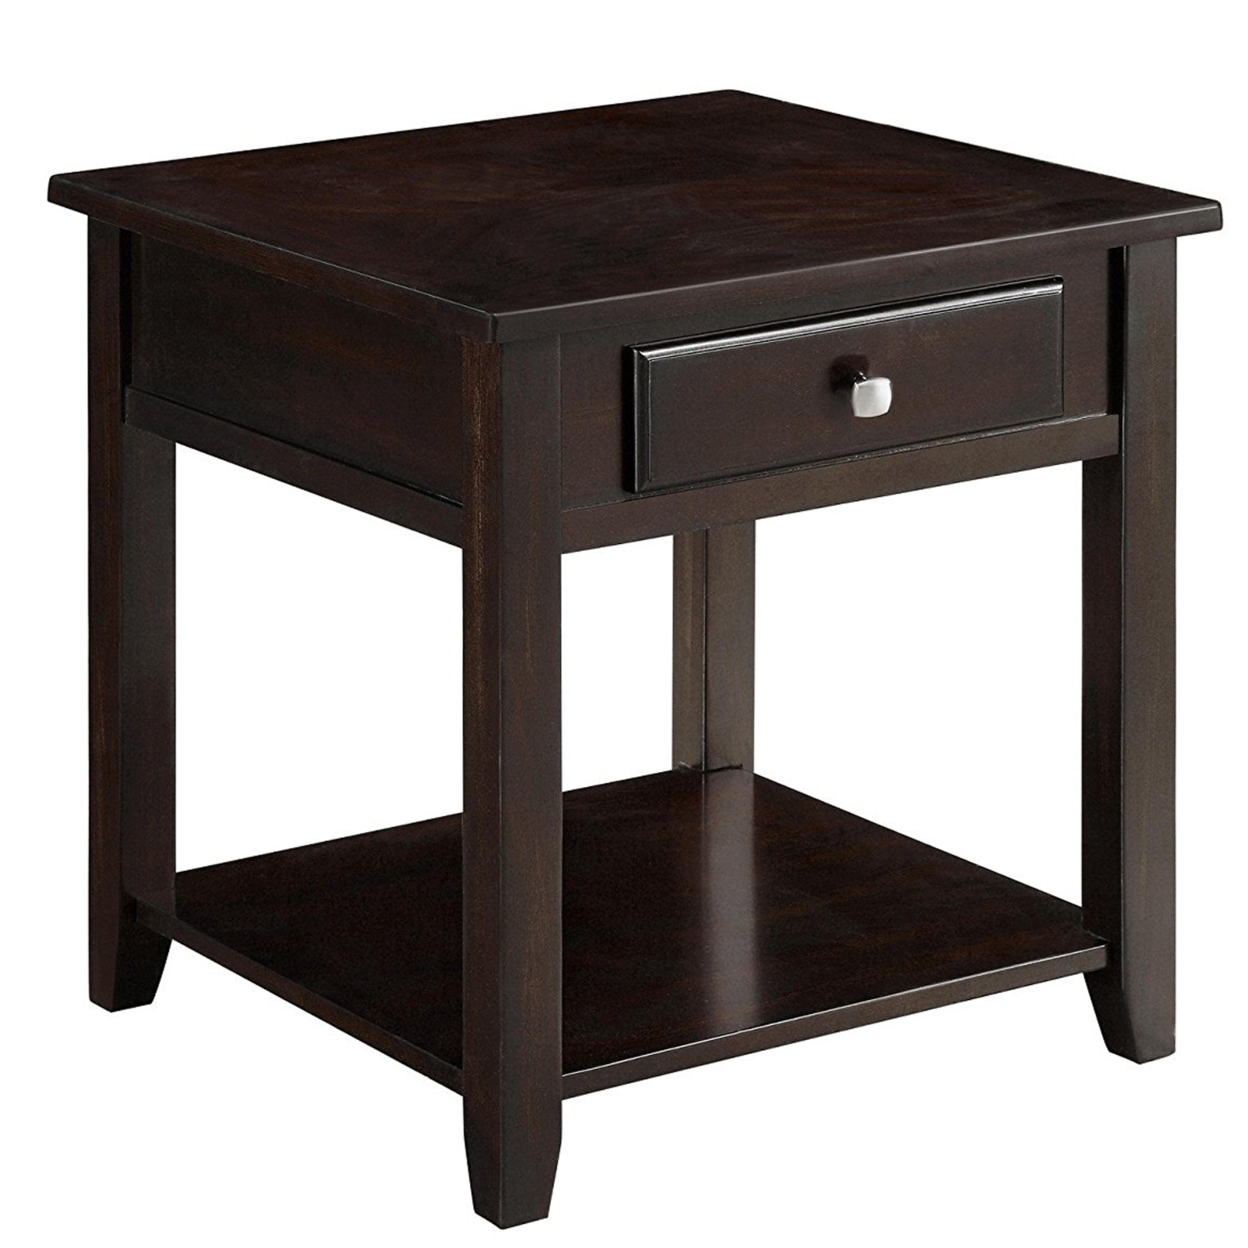 Wooden End Table With Drawer And Bottom Shelf, Walnut Brown- Saltoro Sherpi